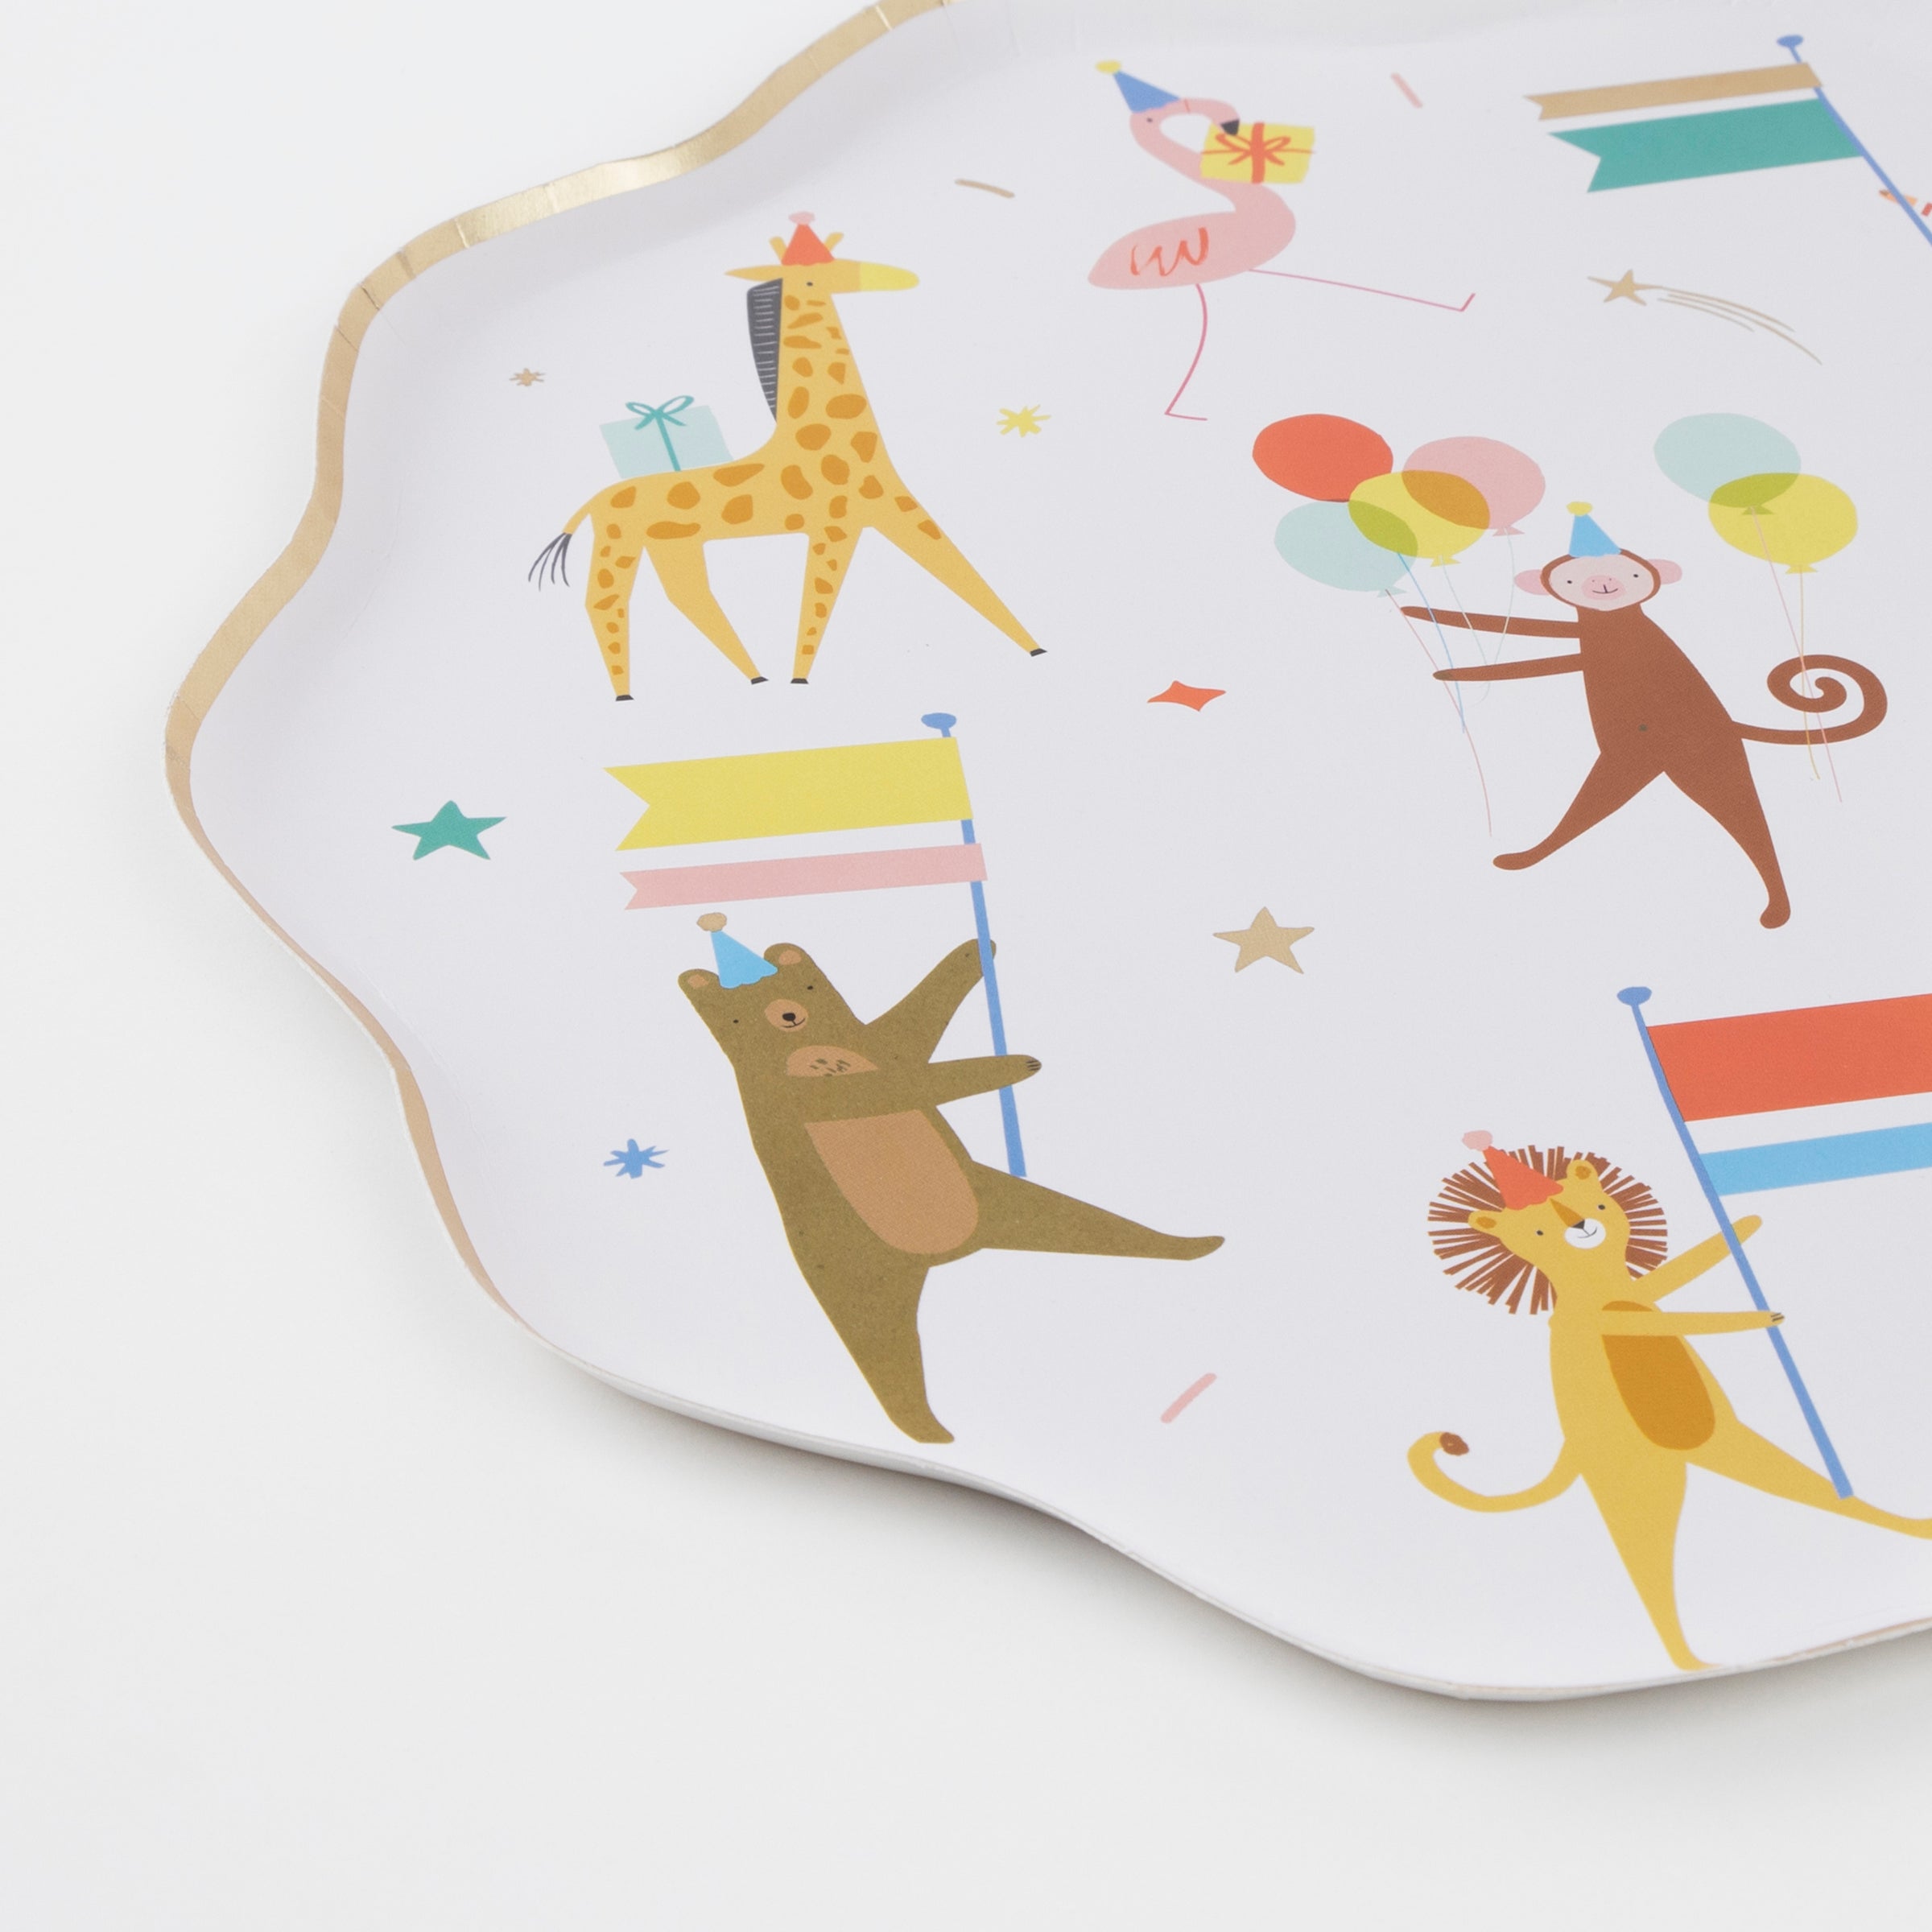 These birthday party plates are perfect for a circus party.